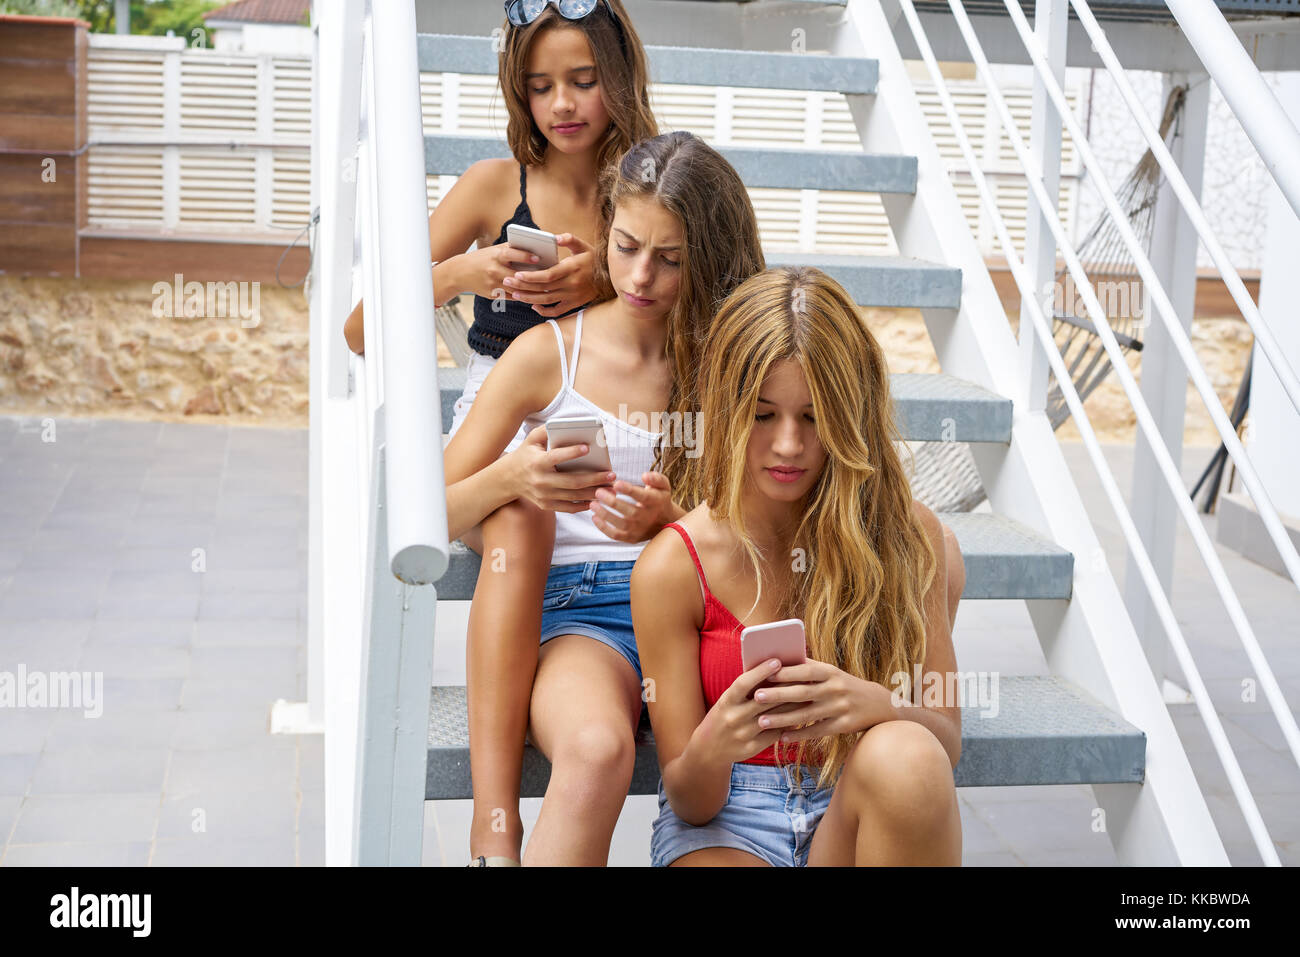 Teen best friends girls in a row with smartphone having fun on stairs Stock Photo